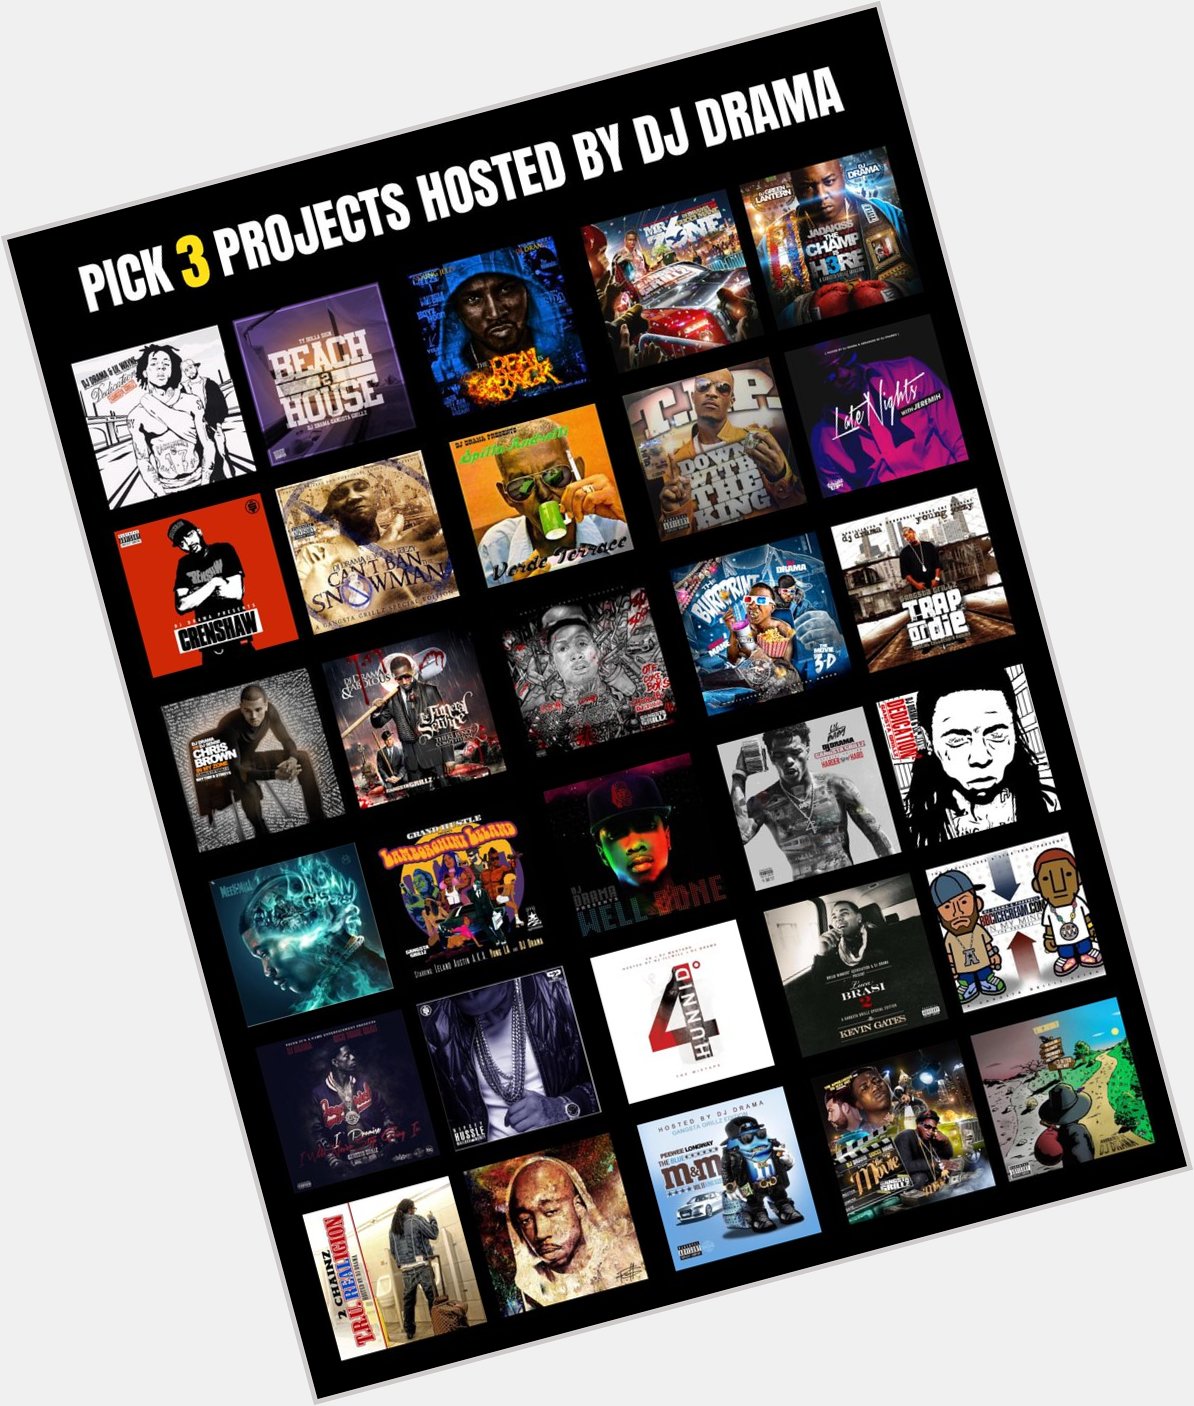 Happy Birthday  Pick 3 tapes hosted by DJ Drama  